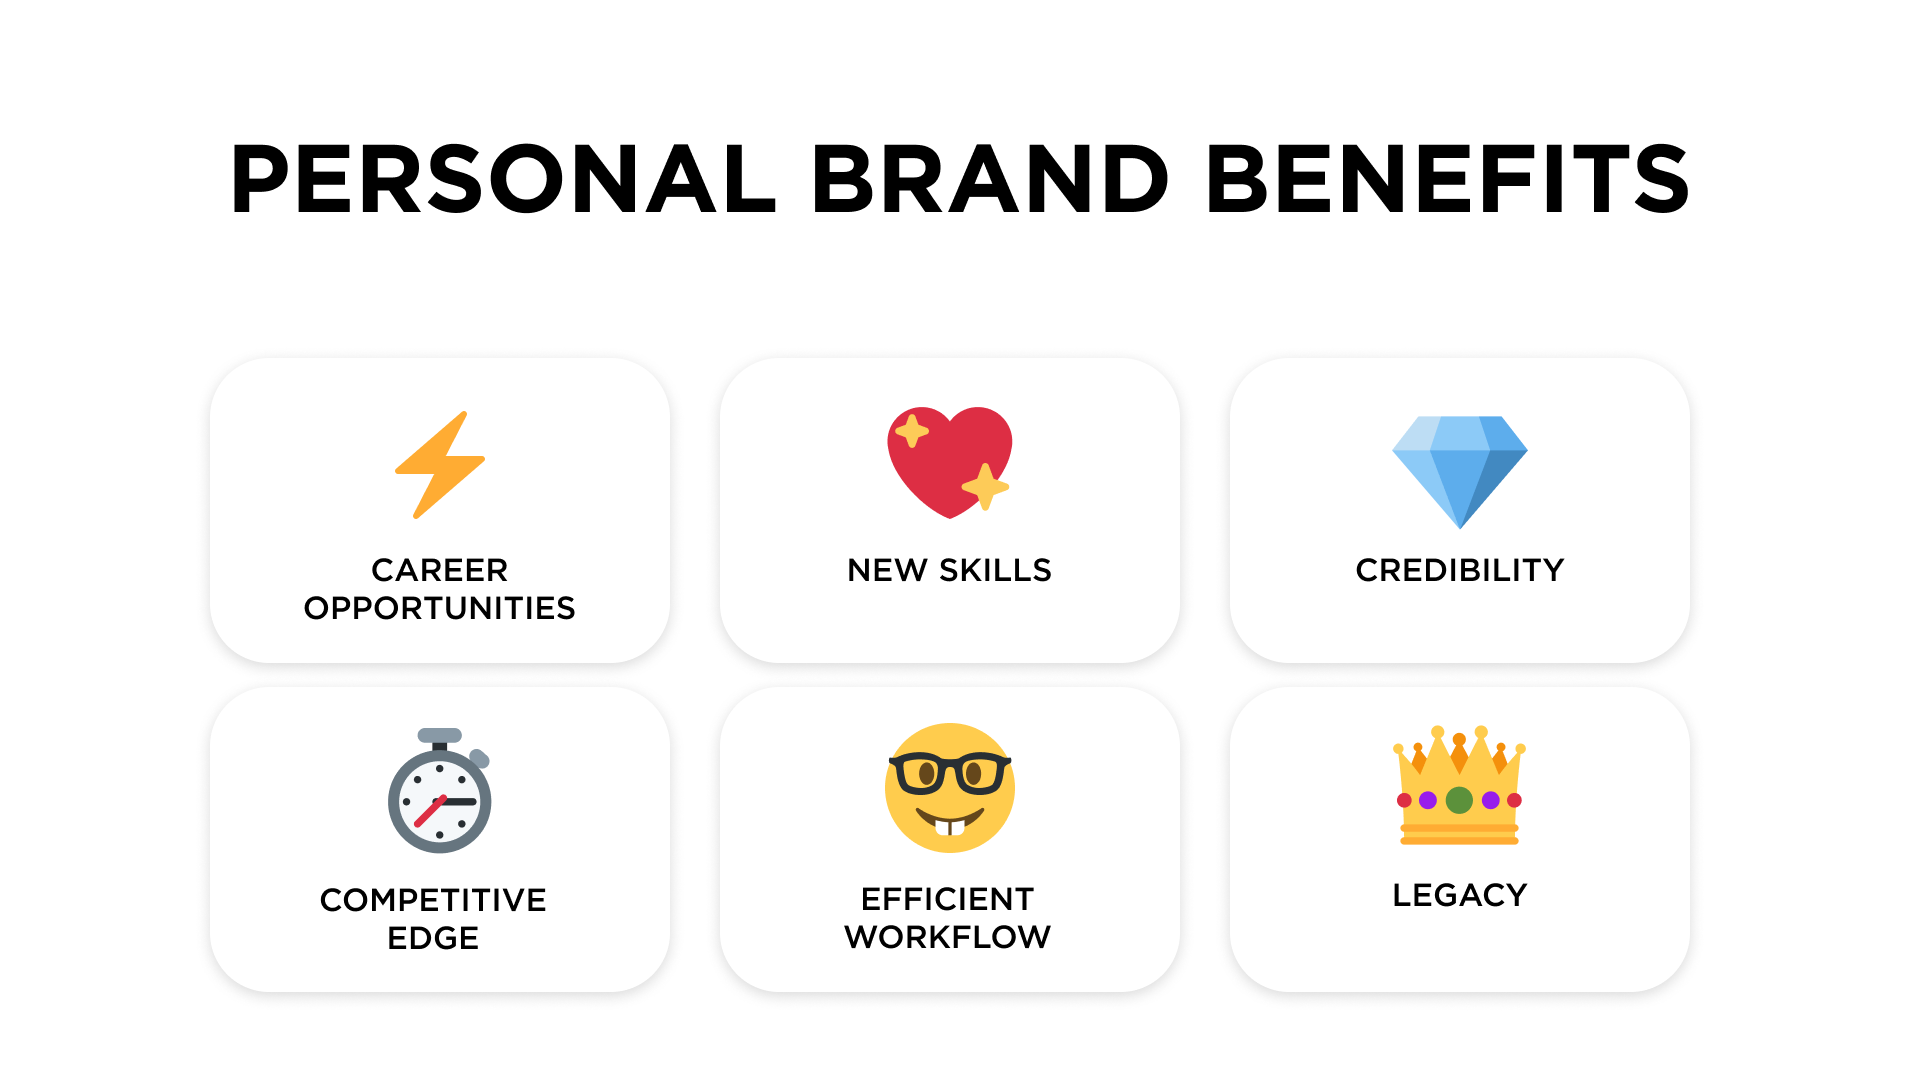 Why create personal brand